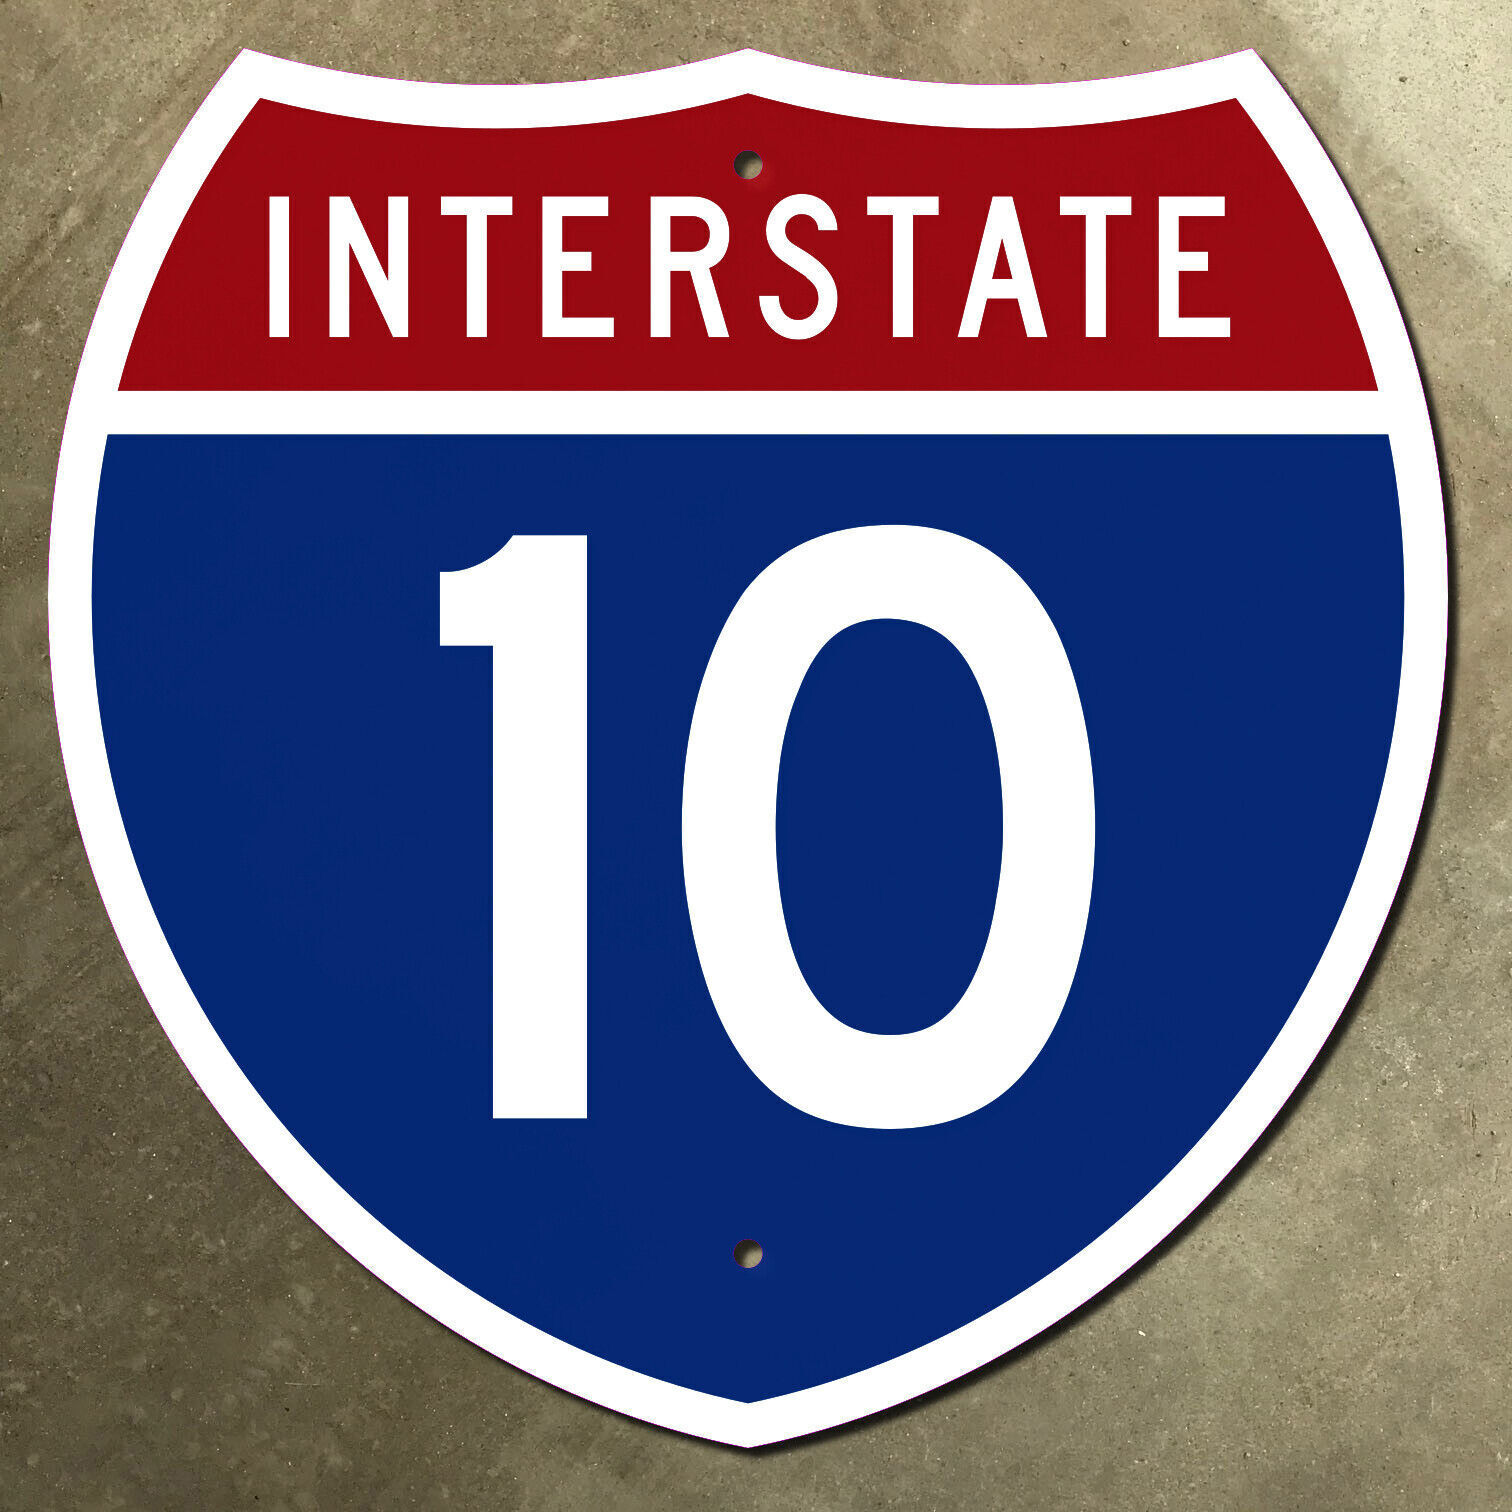 Interstate 10 Tucson El Paso New Orleans highway route marker road sign 18x18